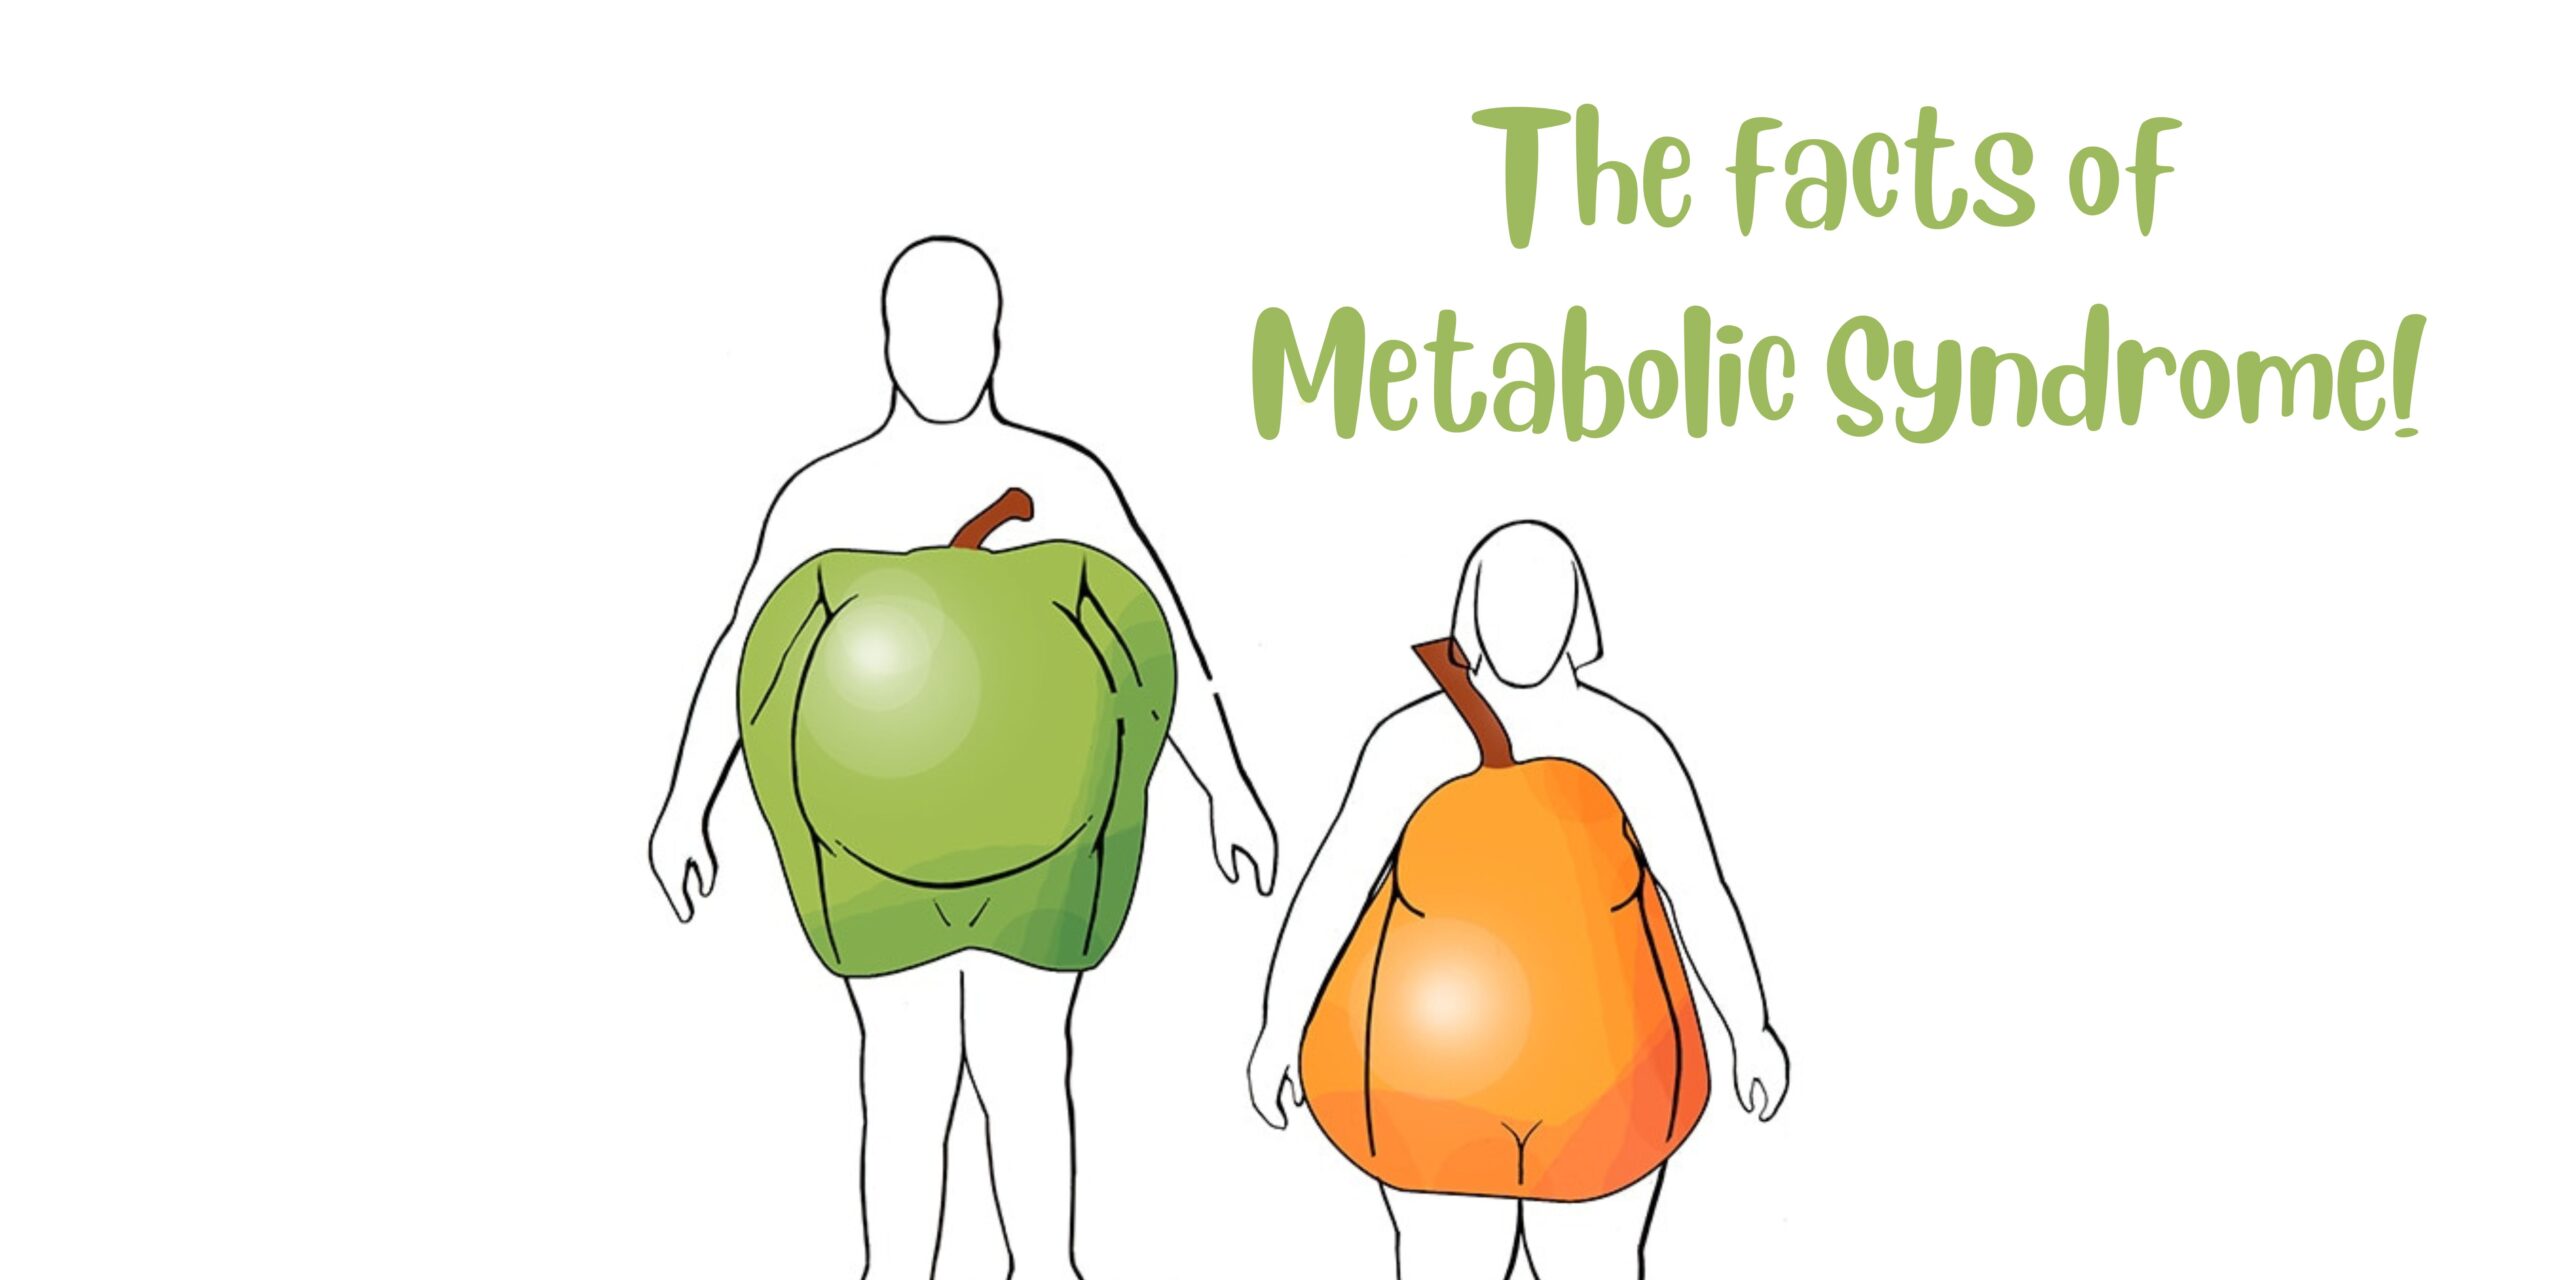 The facts of Metabolic syndrome!